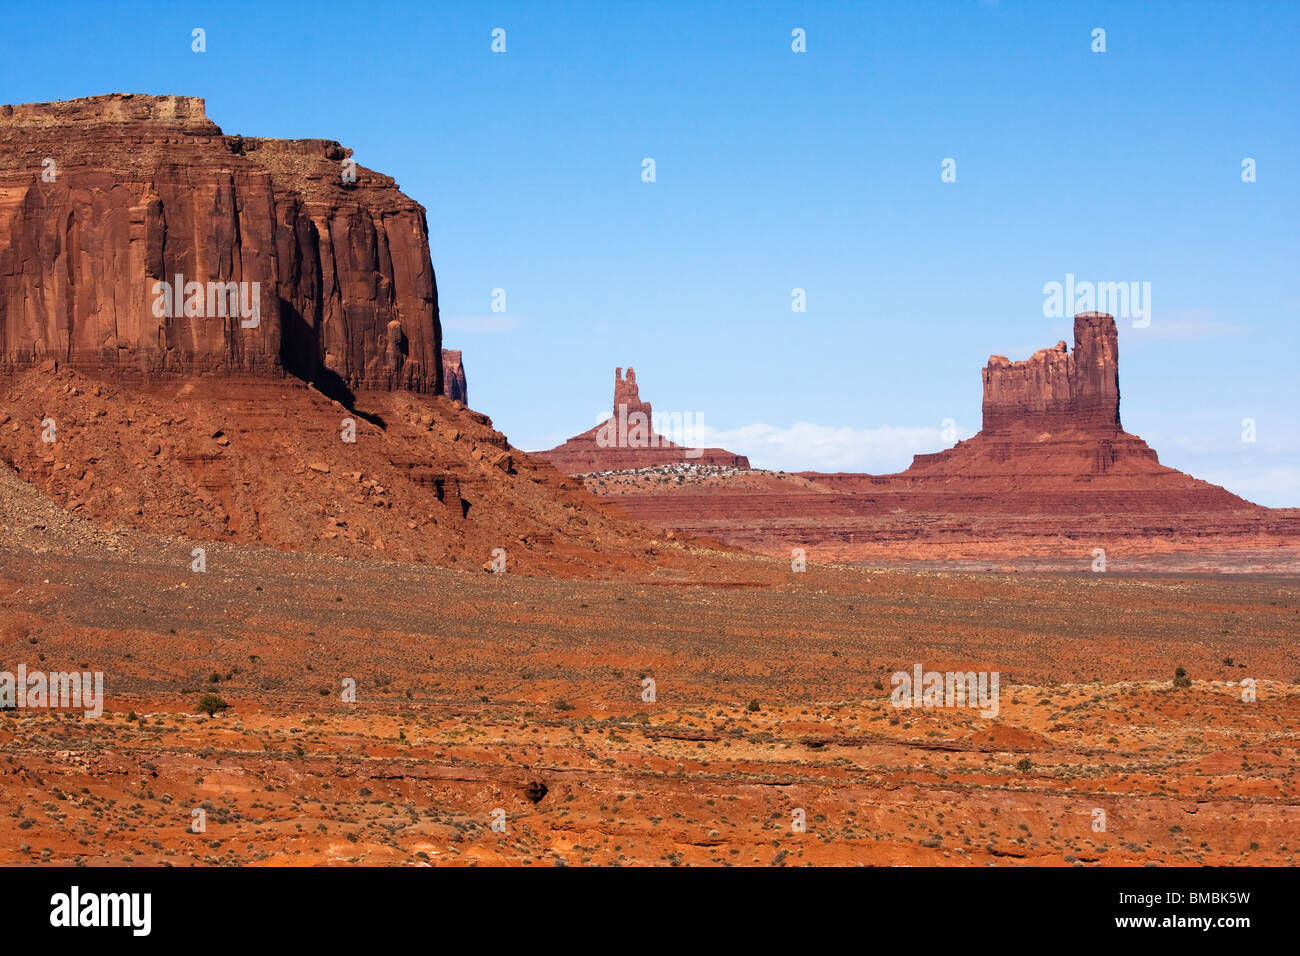 Monolith red formations at Monument Arizona Photo - Alamy